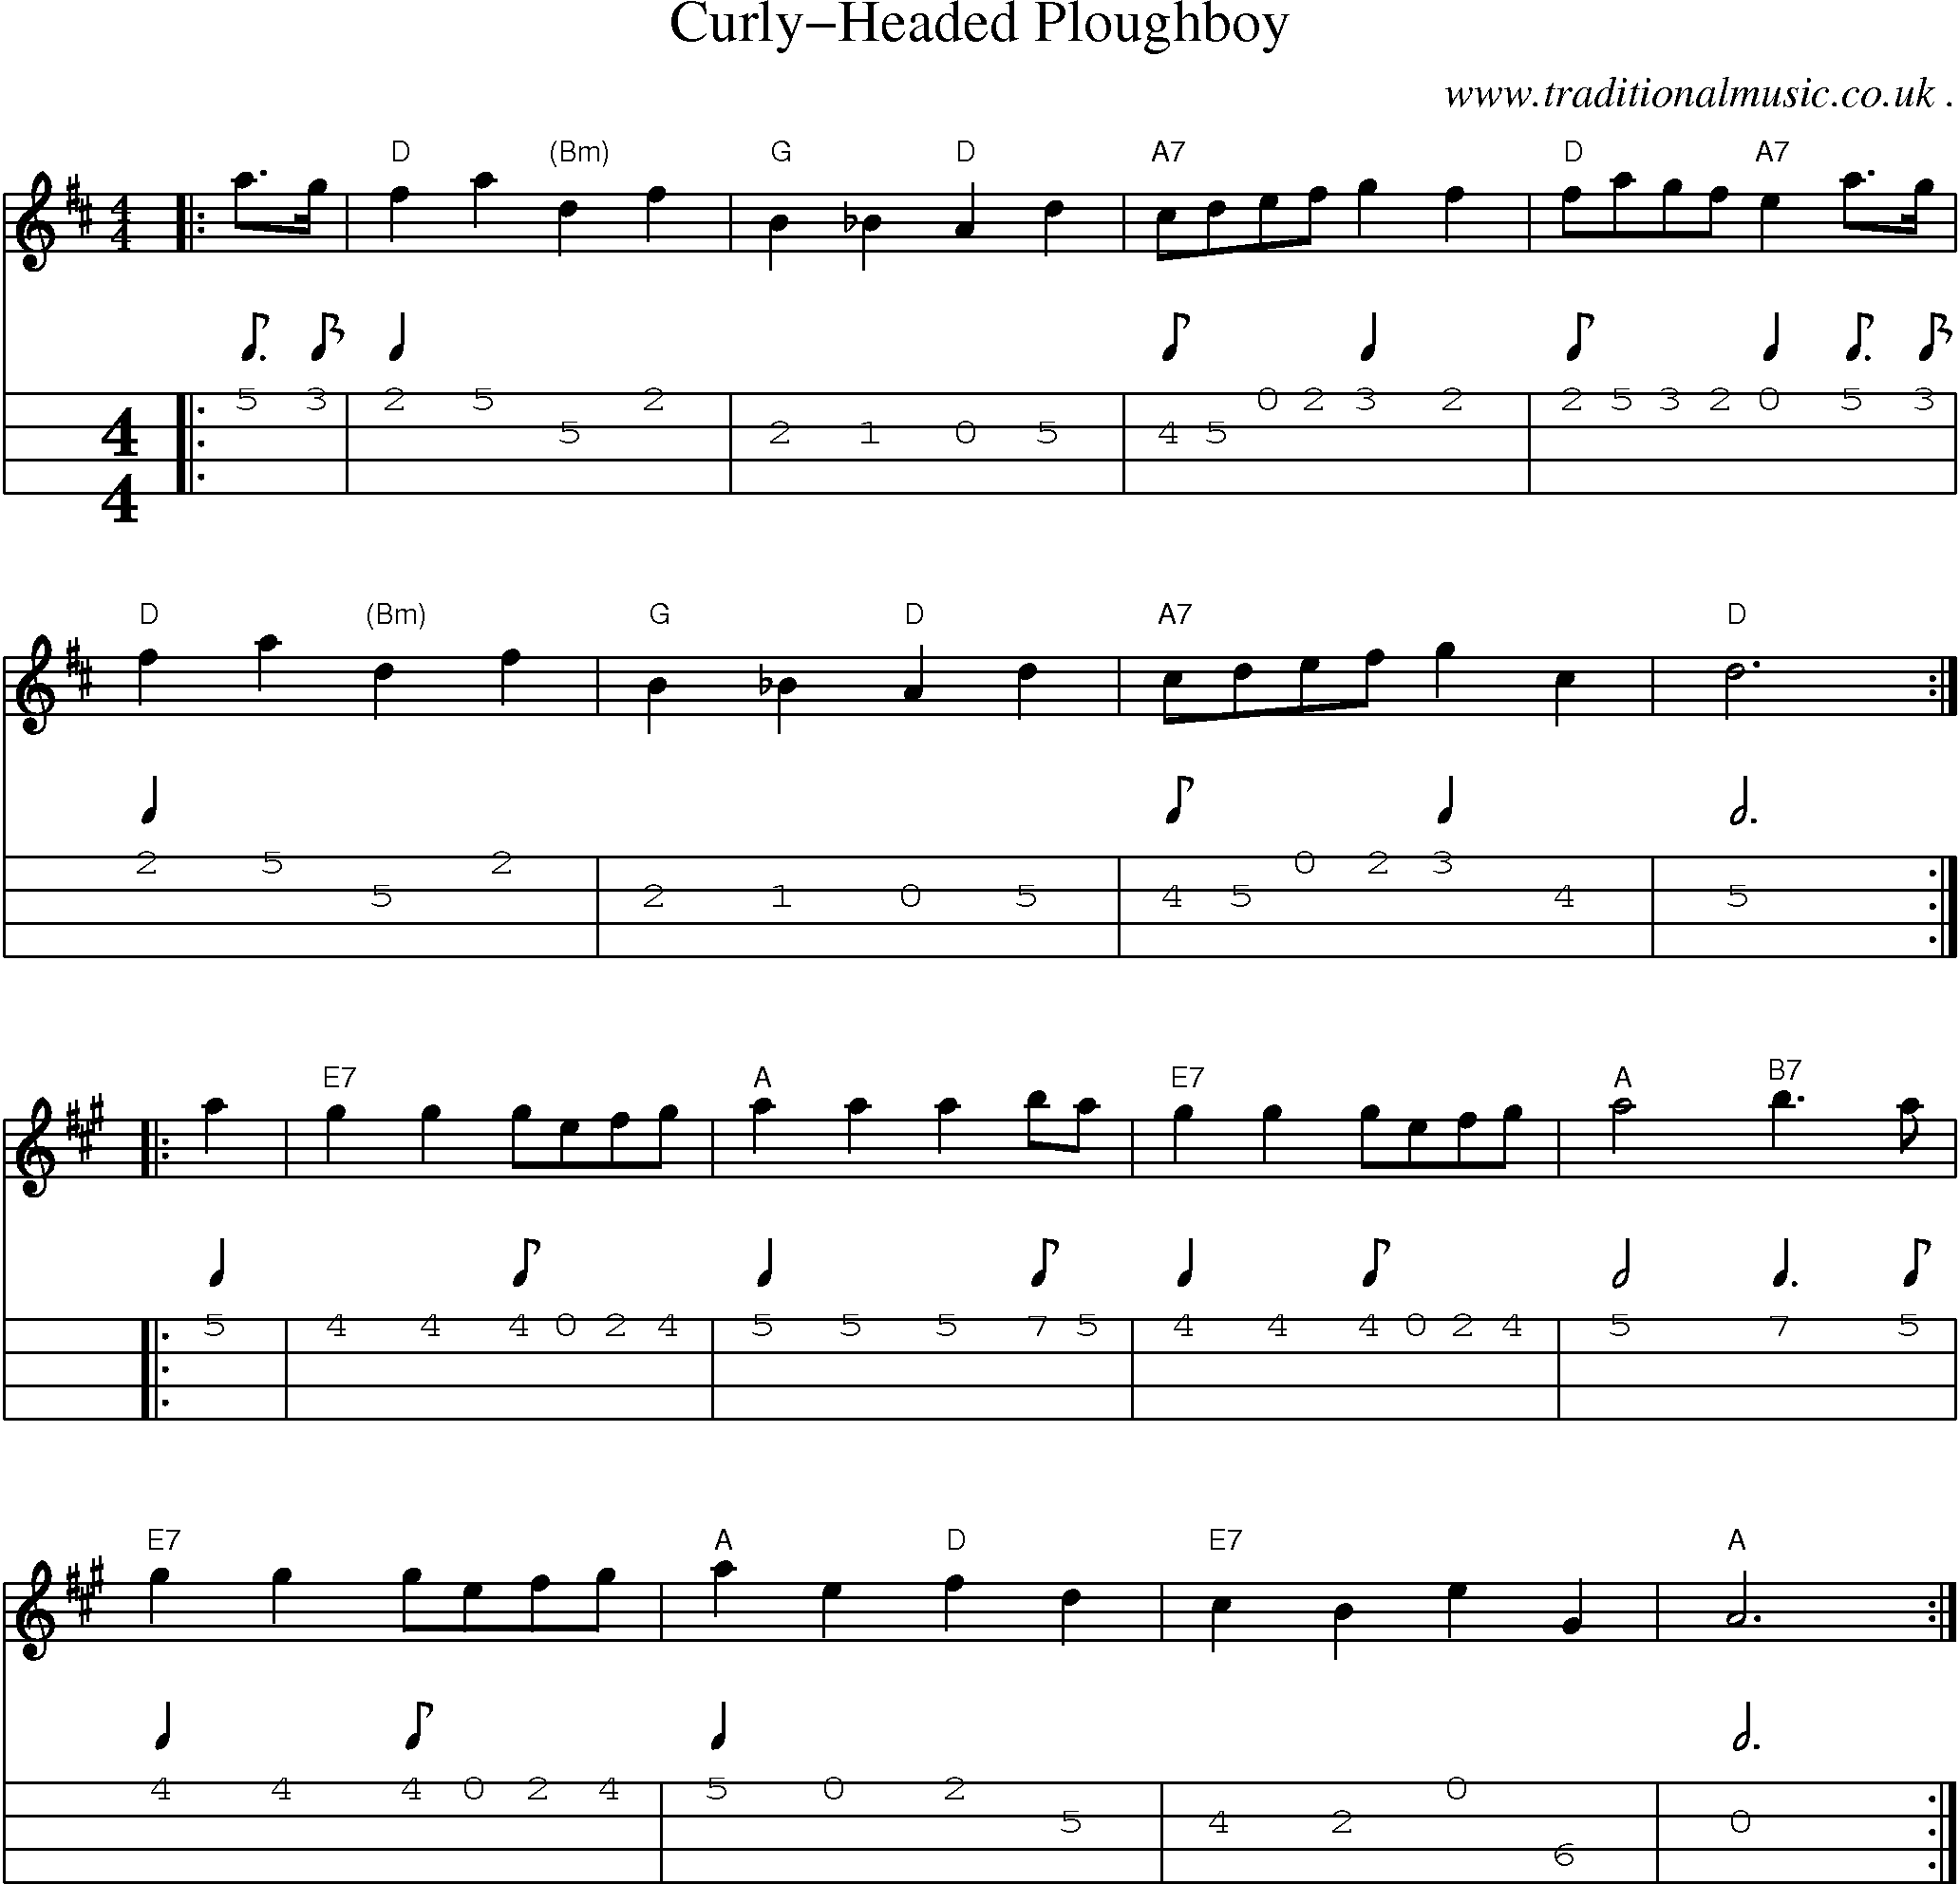 Music Score and Guitar Tabs for Curly-headed Ploughboy